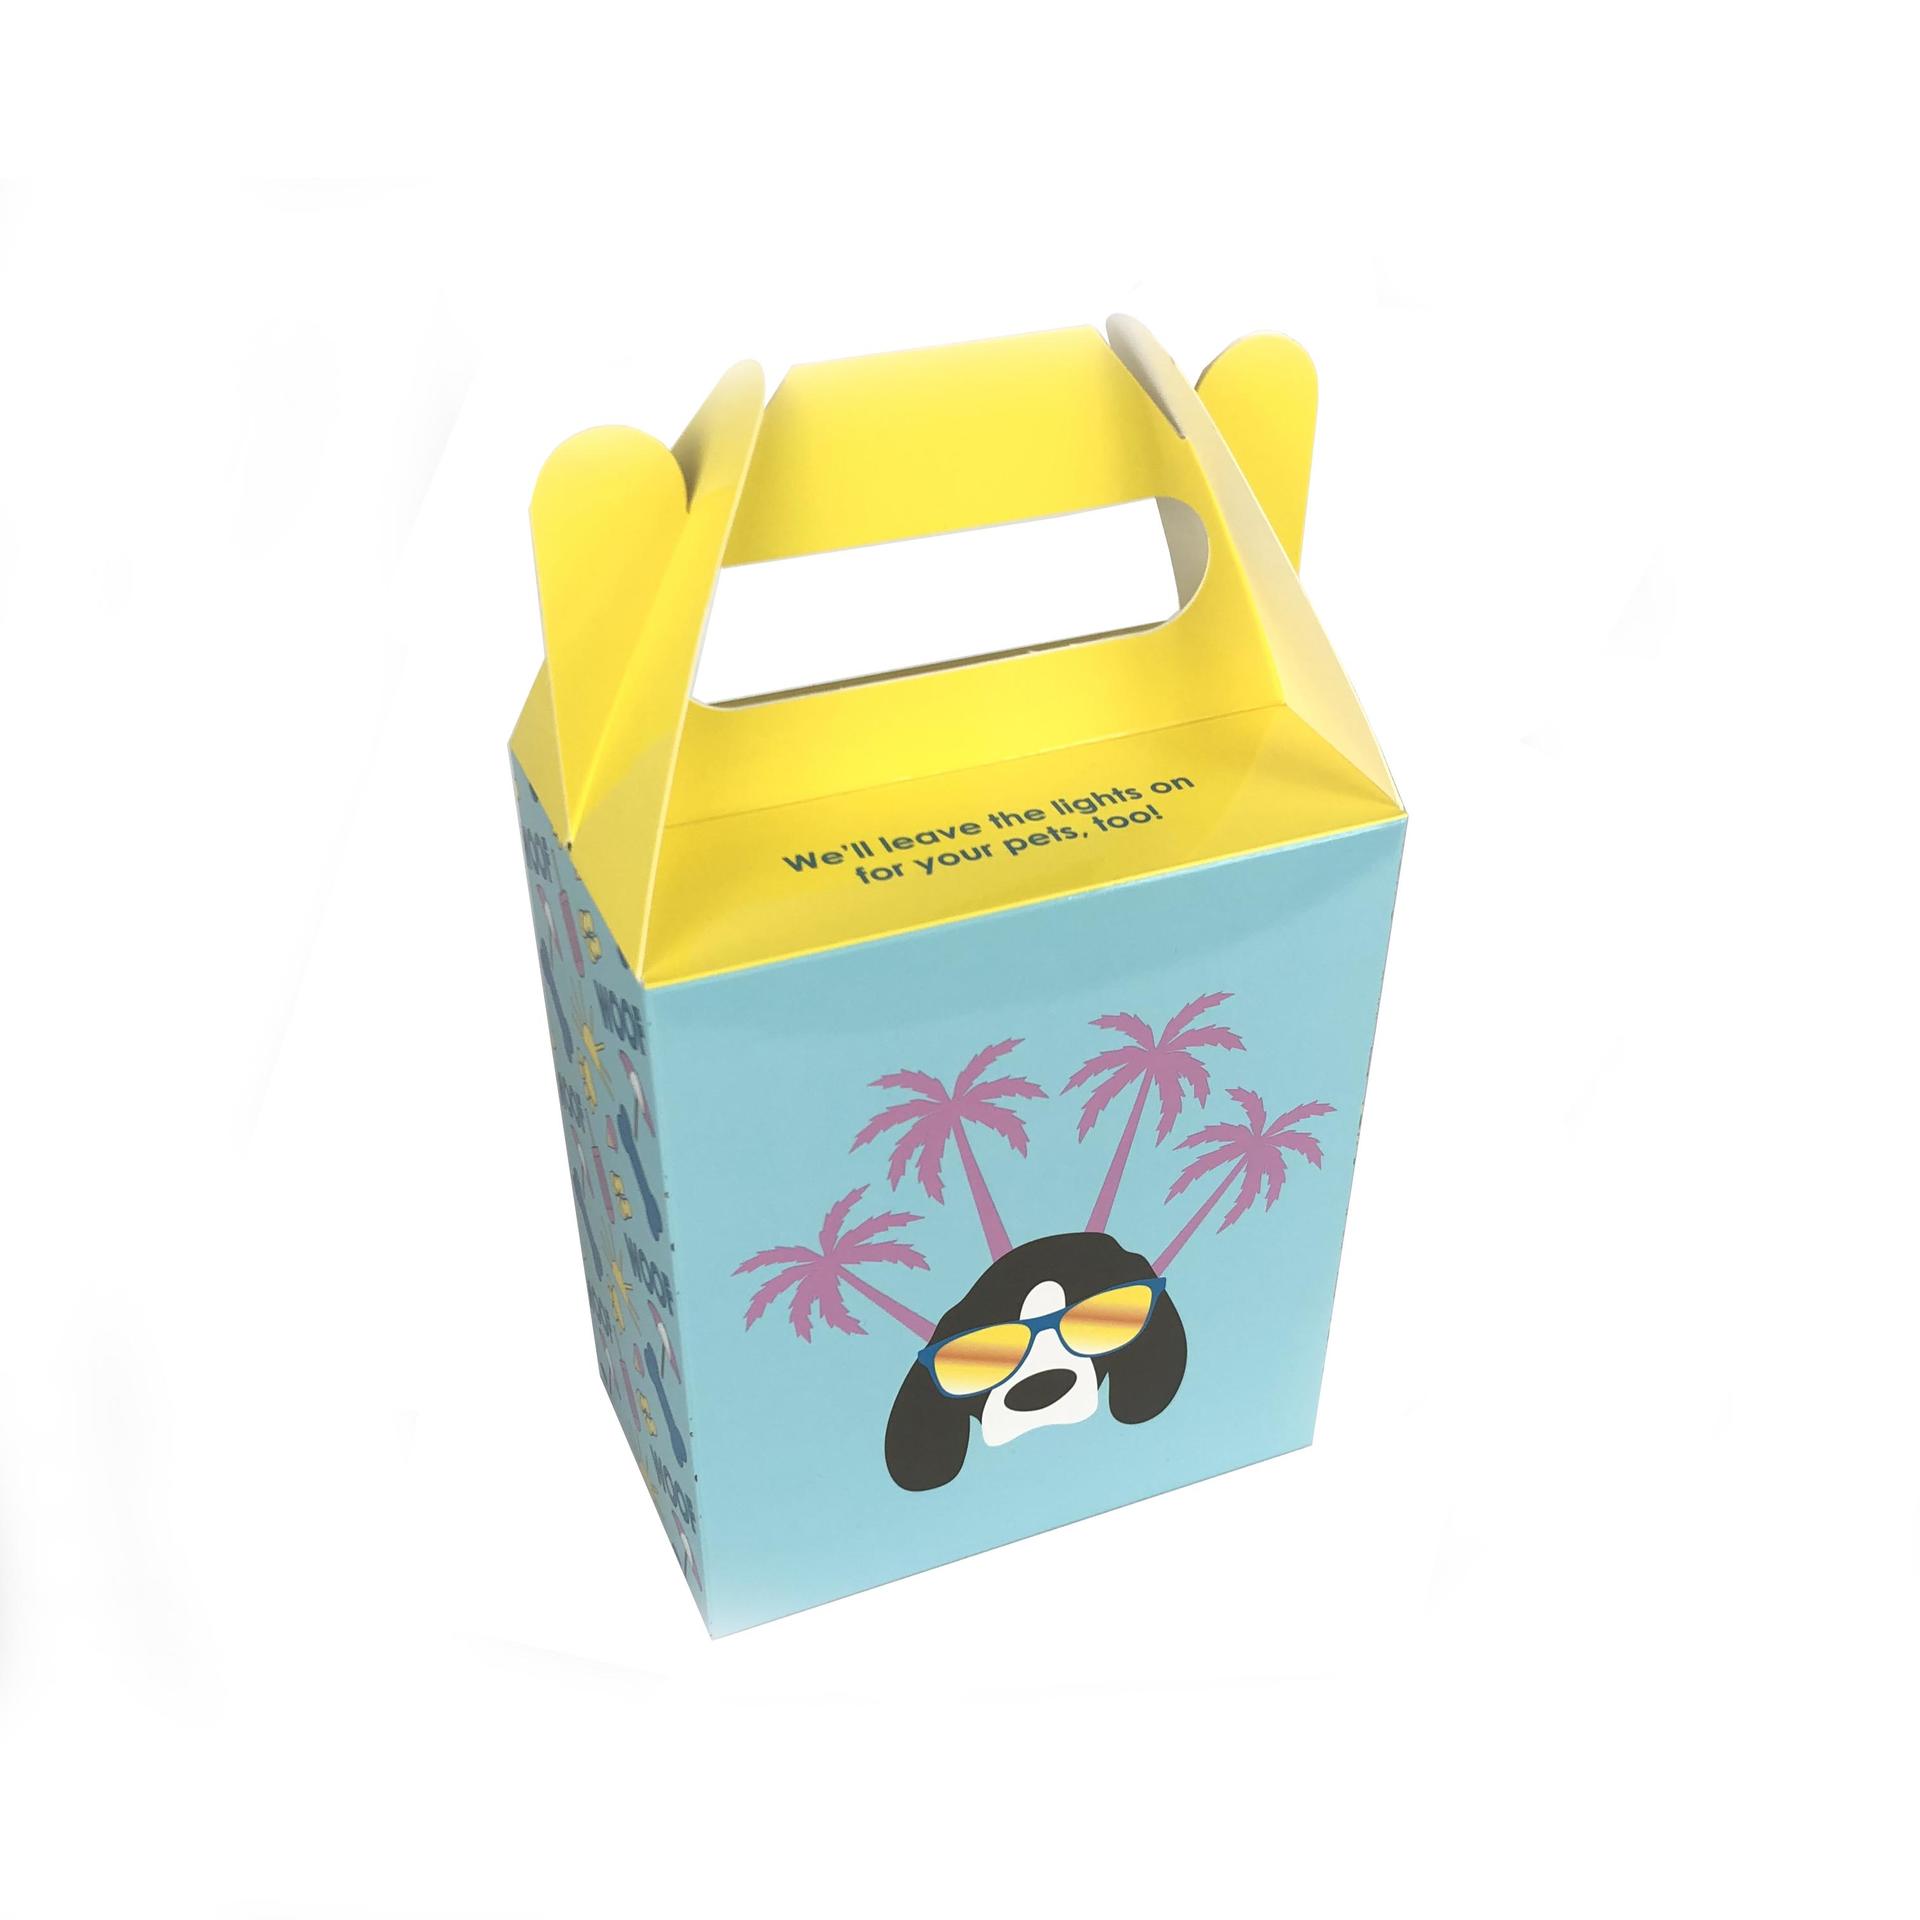 custom food boxes supplier for food Welm